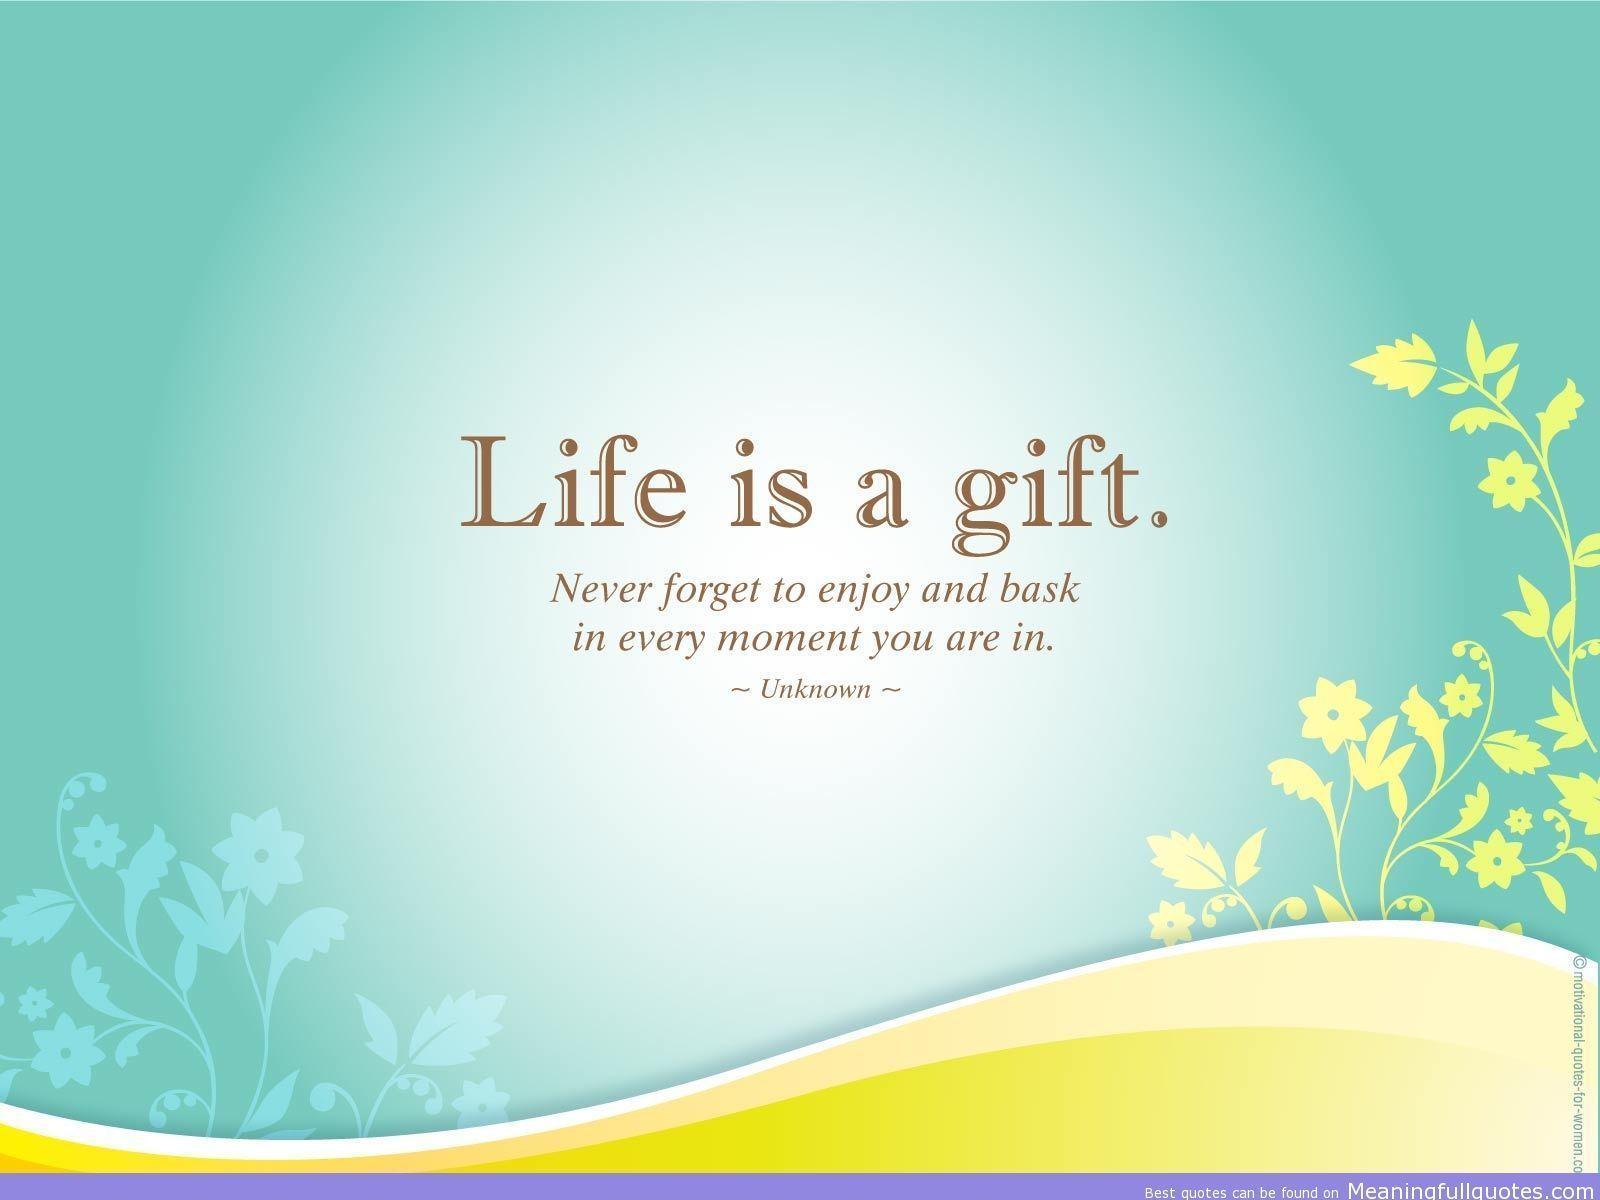 Wallpapers For > Cute Quotes Backgrounds For Desktop